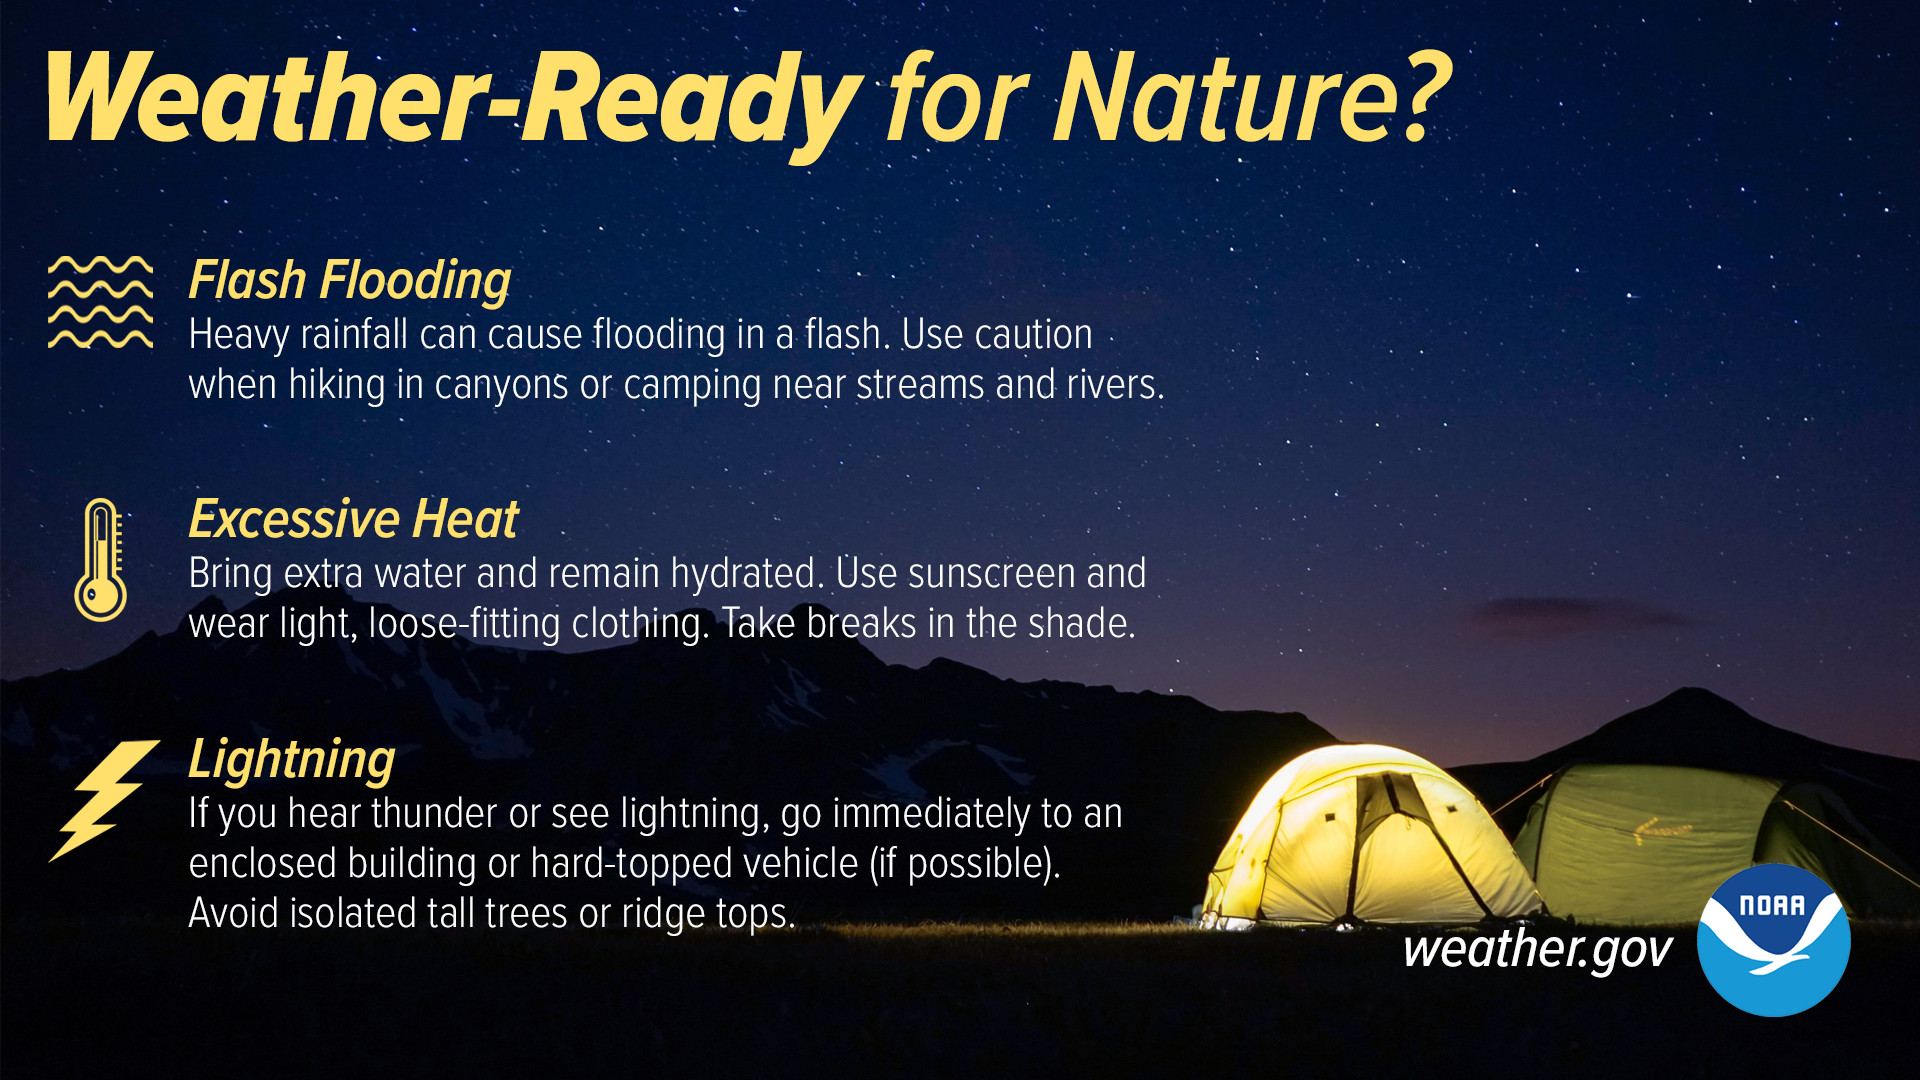 Be prepared for, and know how to react to, weather and water hazards such as flash flooding, excessive heat, and lightning.